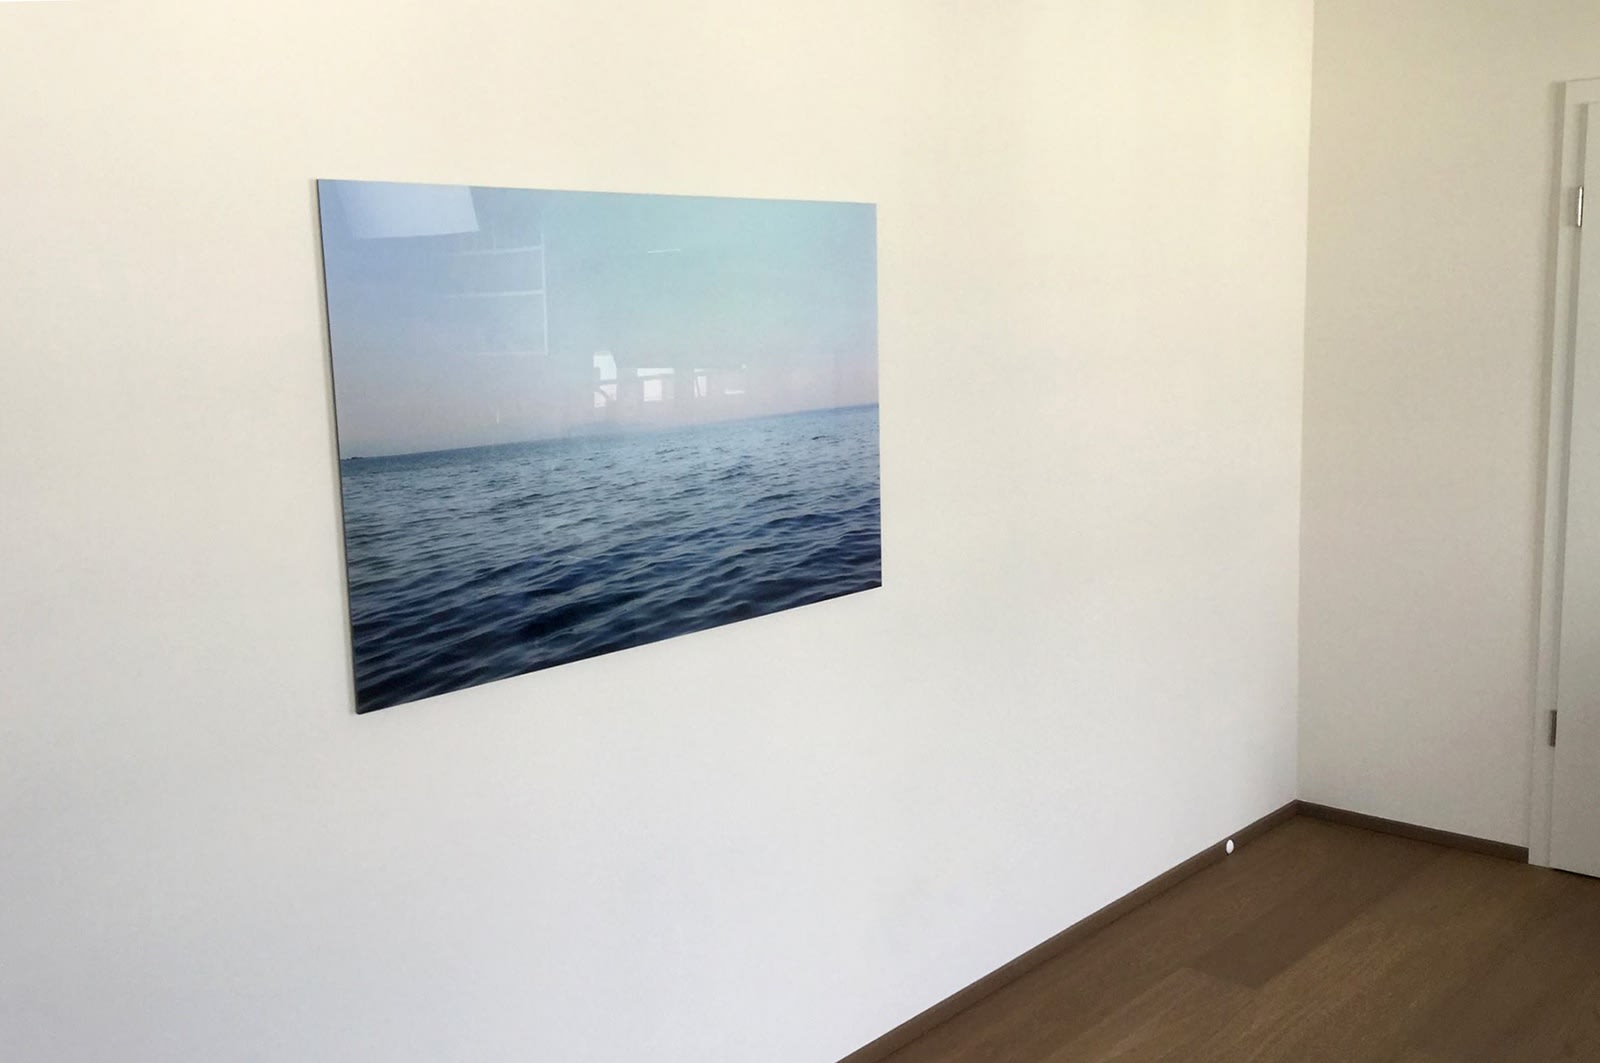 Commissioned work 'The Greek sea' is decorating a flat in Düsseldorf, Germany